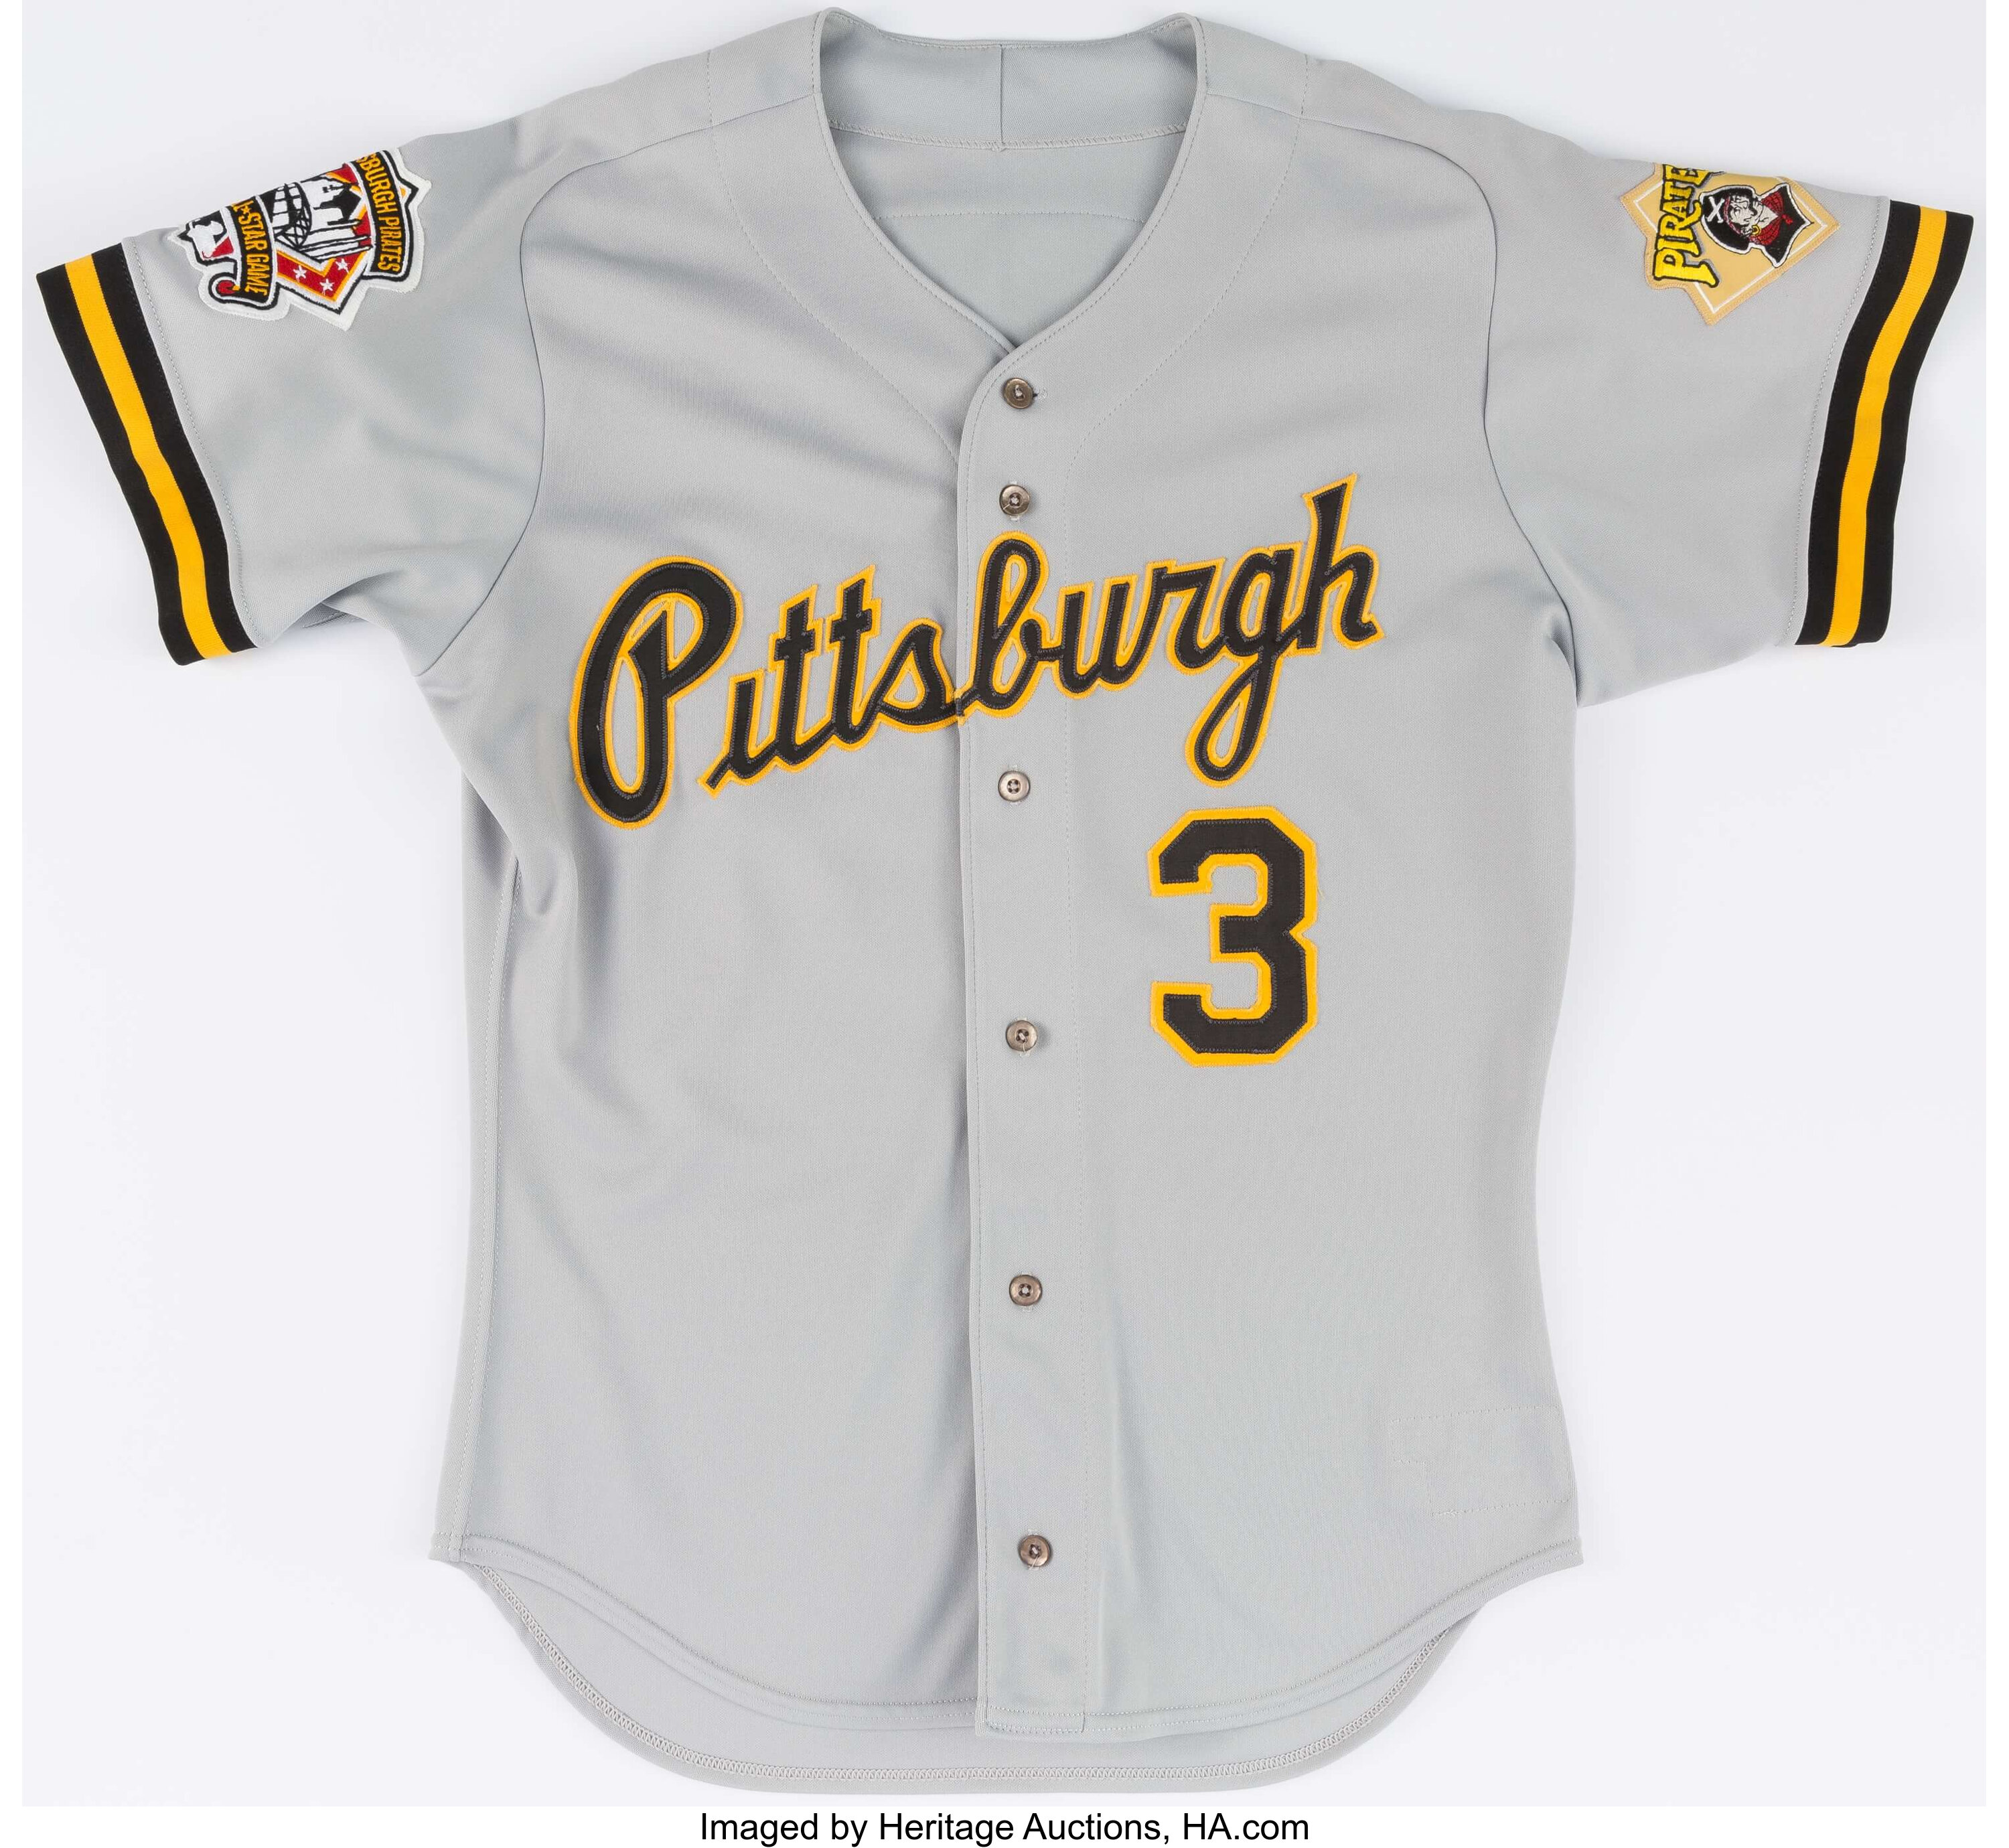 Pittsburgh Pirates Collecting Guide, Tickets, Jerseys